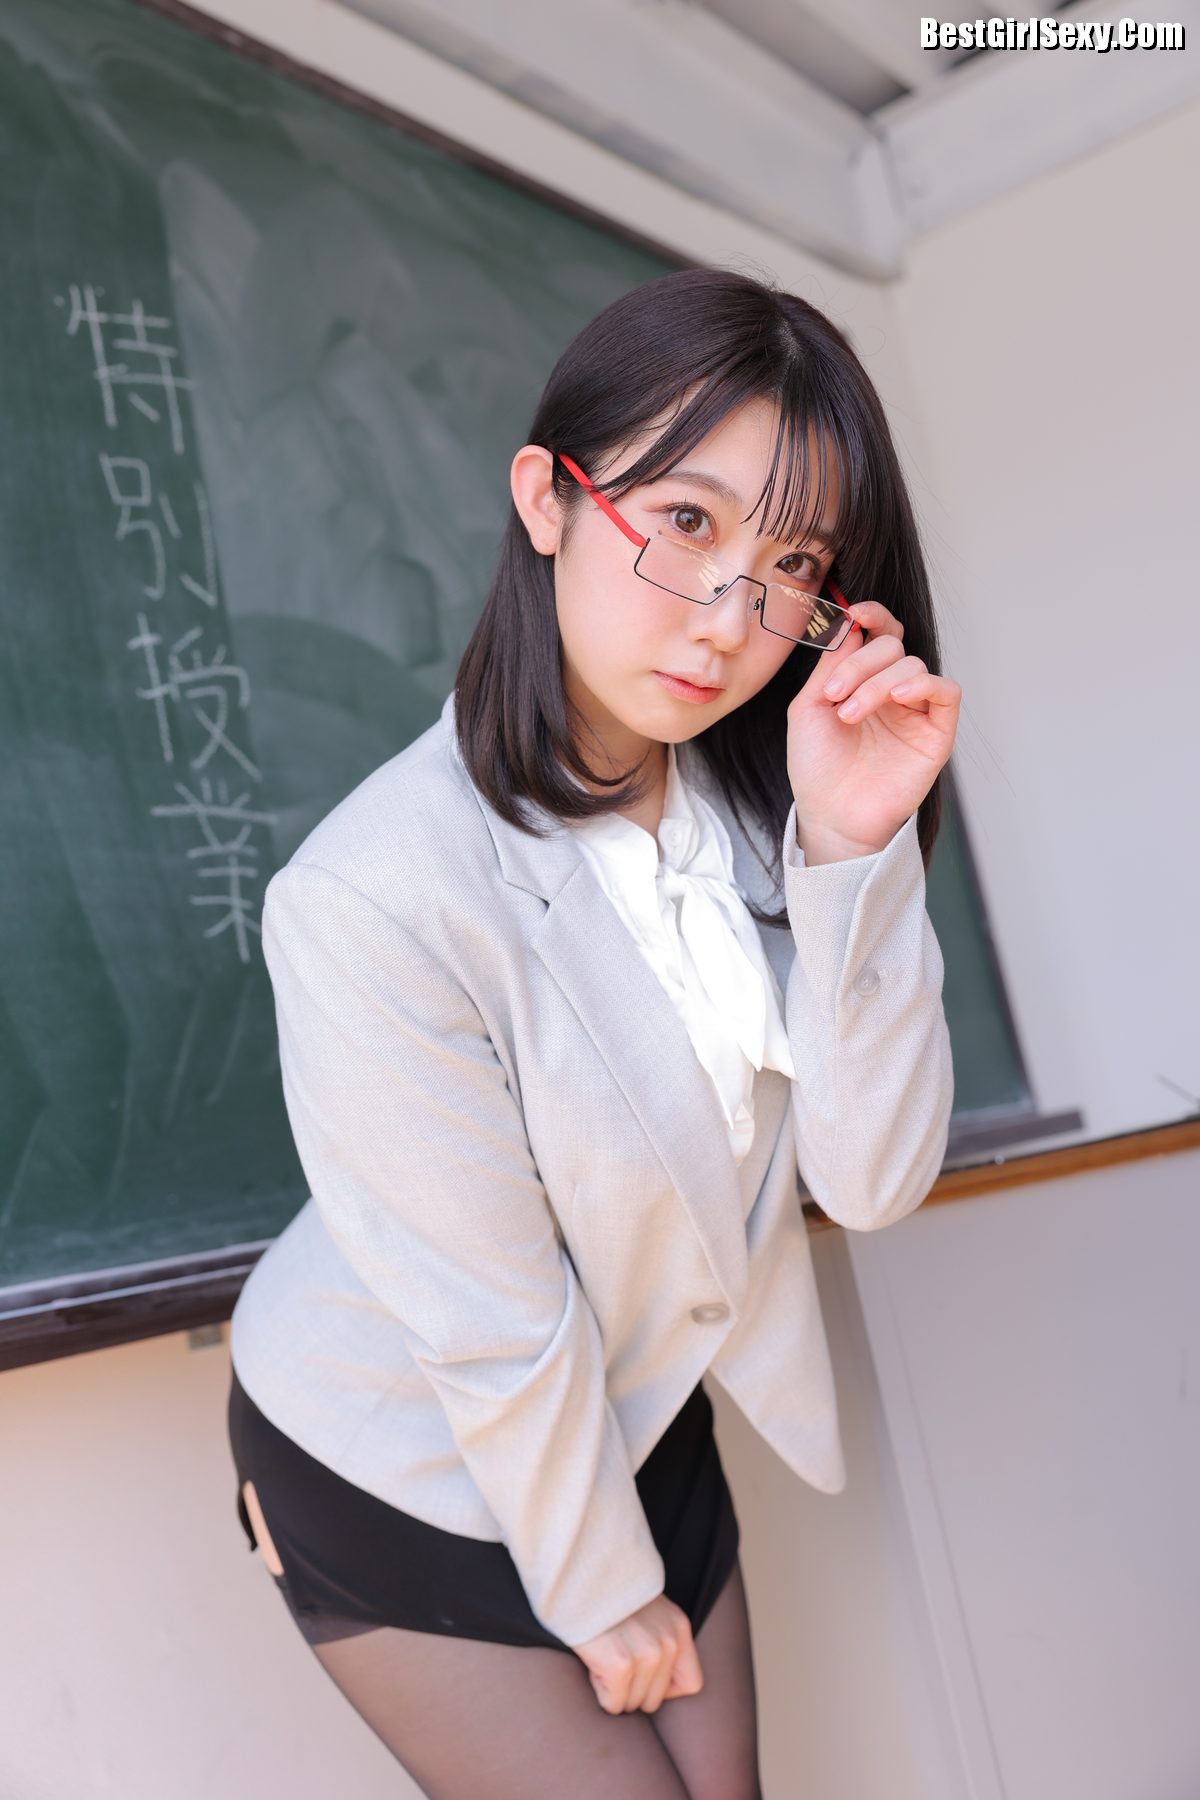 Momo Ogawa 大河もも Only I Know What Would Happen If Momo chan Became A Teacher A 0015 9830373547.jpg